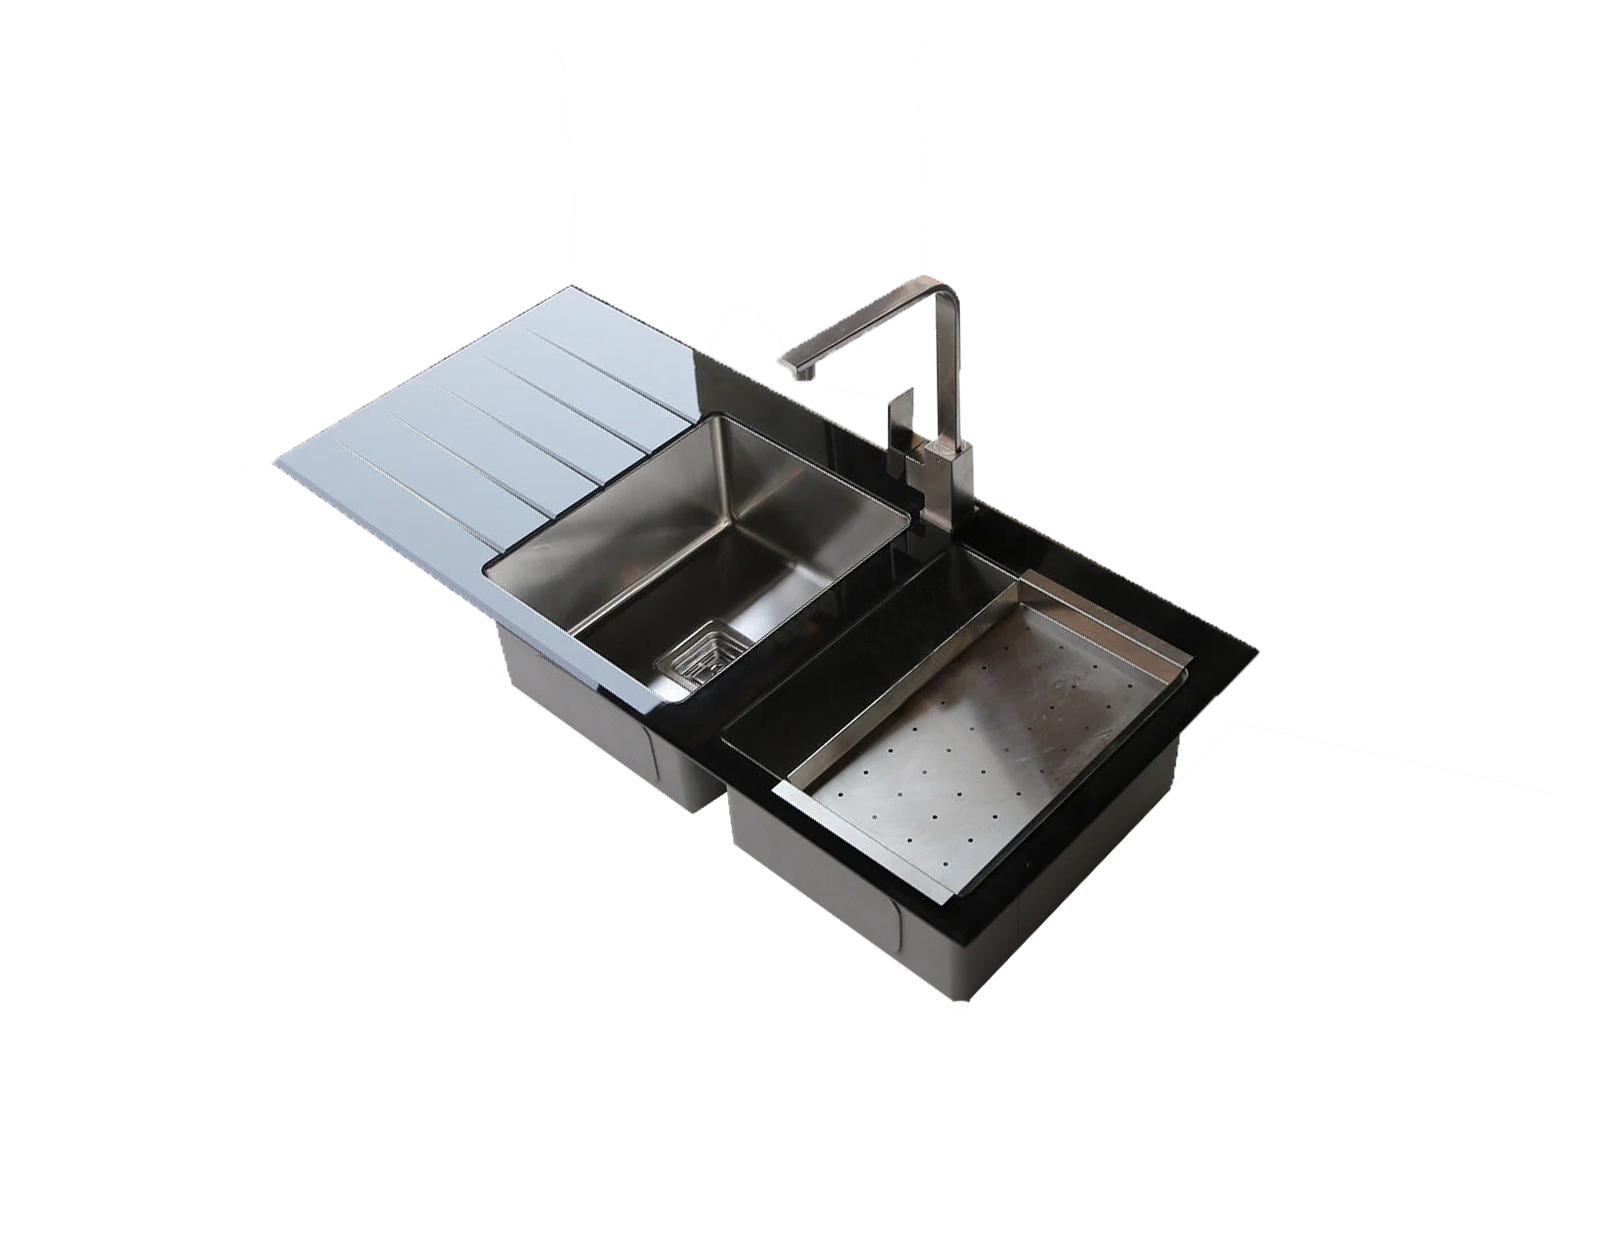 Cube tempered GLASS 304 Stainless steel kitchen sink basin double bowl exclusive